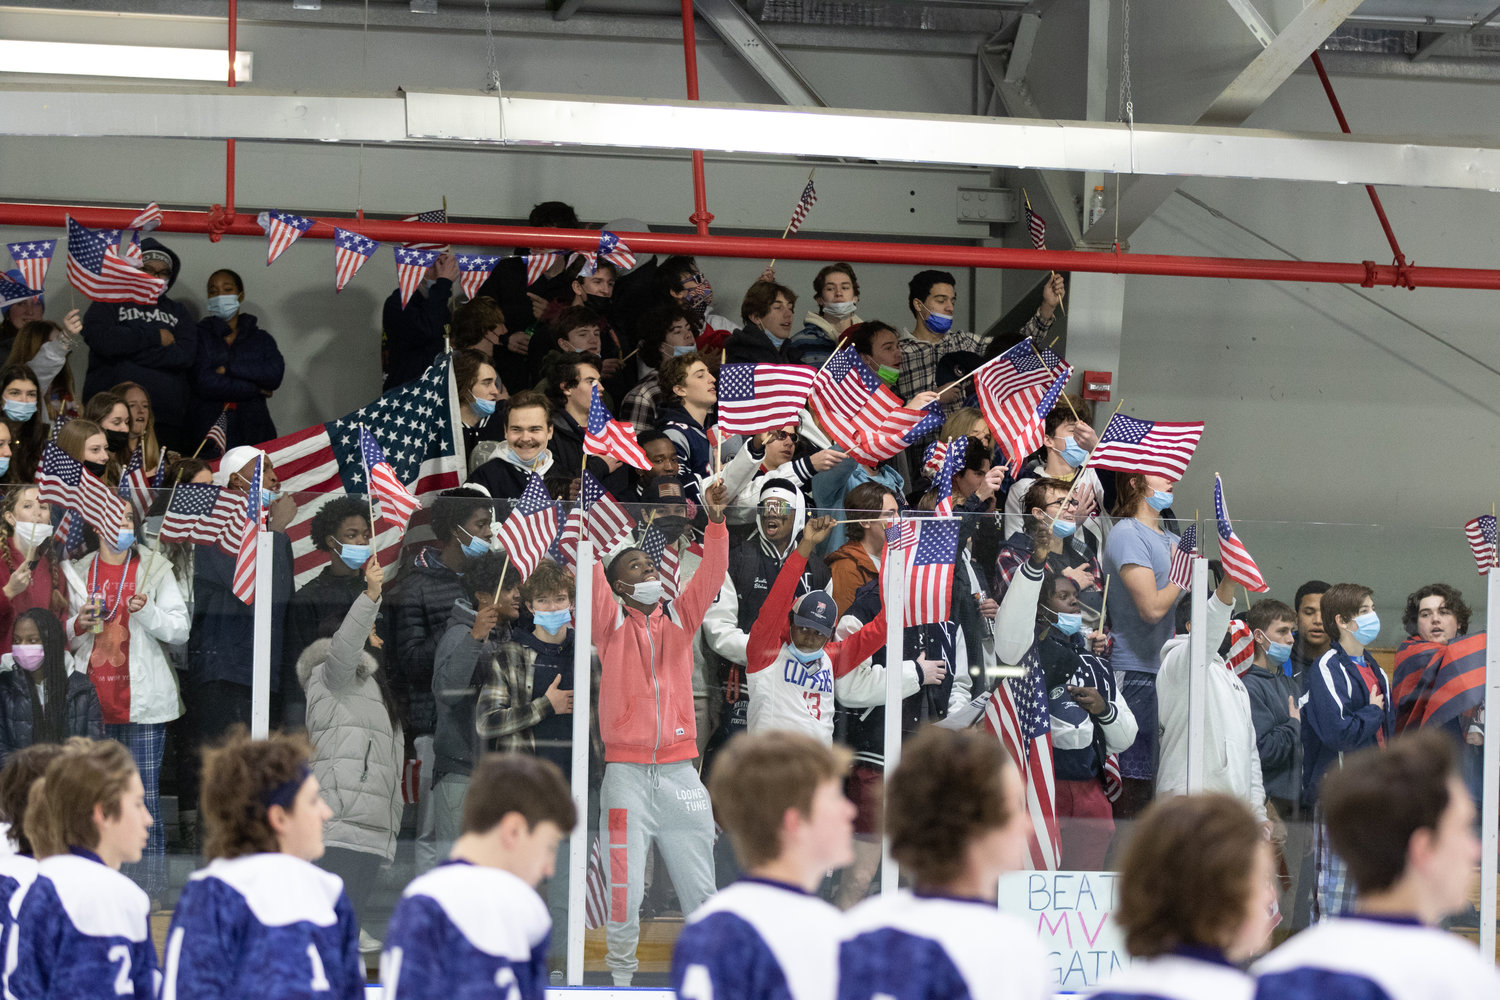 The USA-themed student section cheering on the Whalers boys hockey team, who went 7-8-4 this season and are bound for the playoffs.